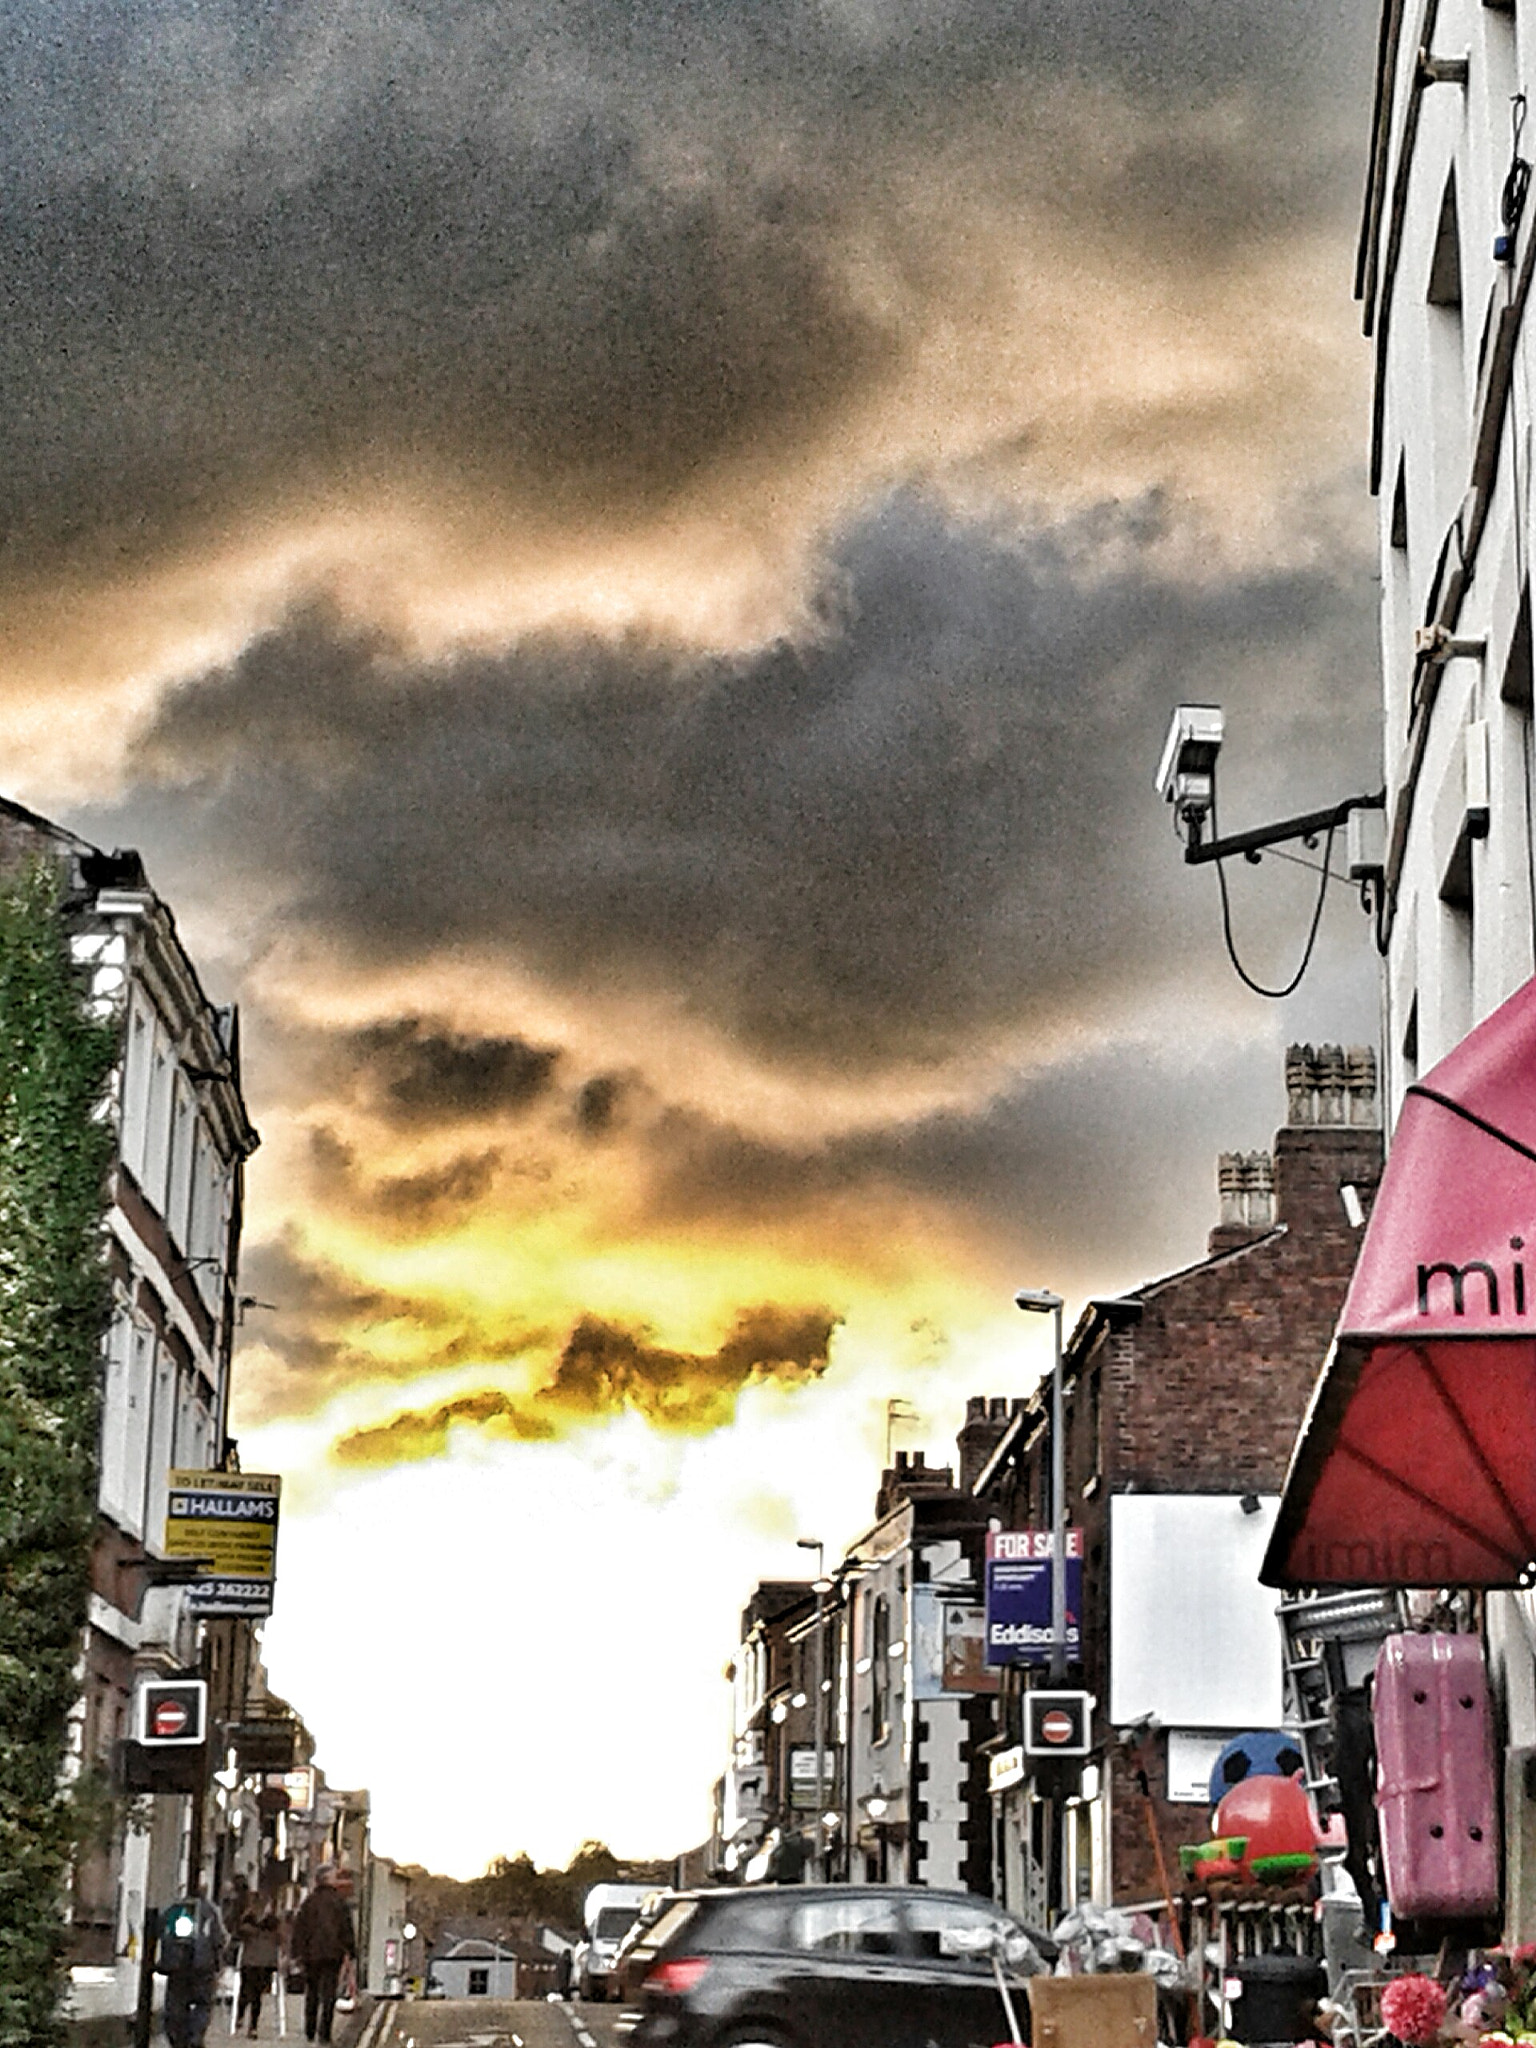 Samsung Galaxy S3 Mini sample photo. Old chestergate photography